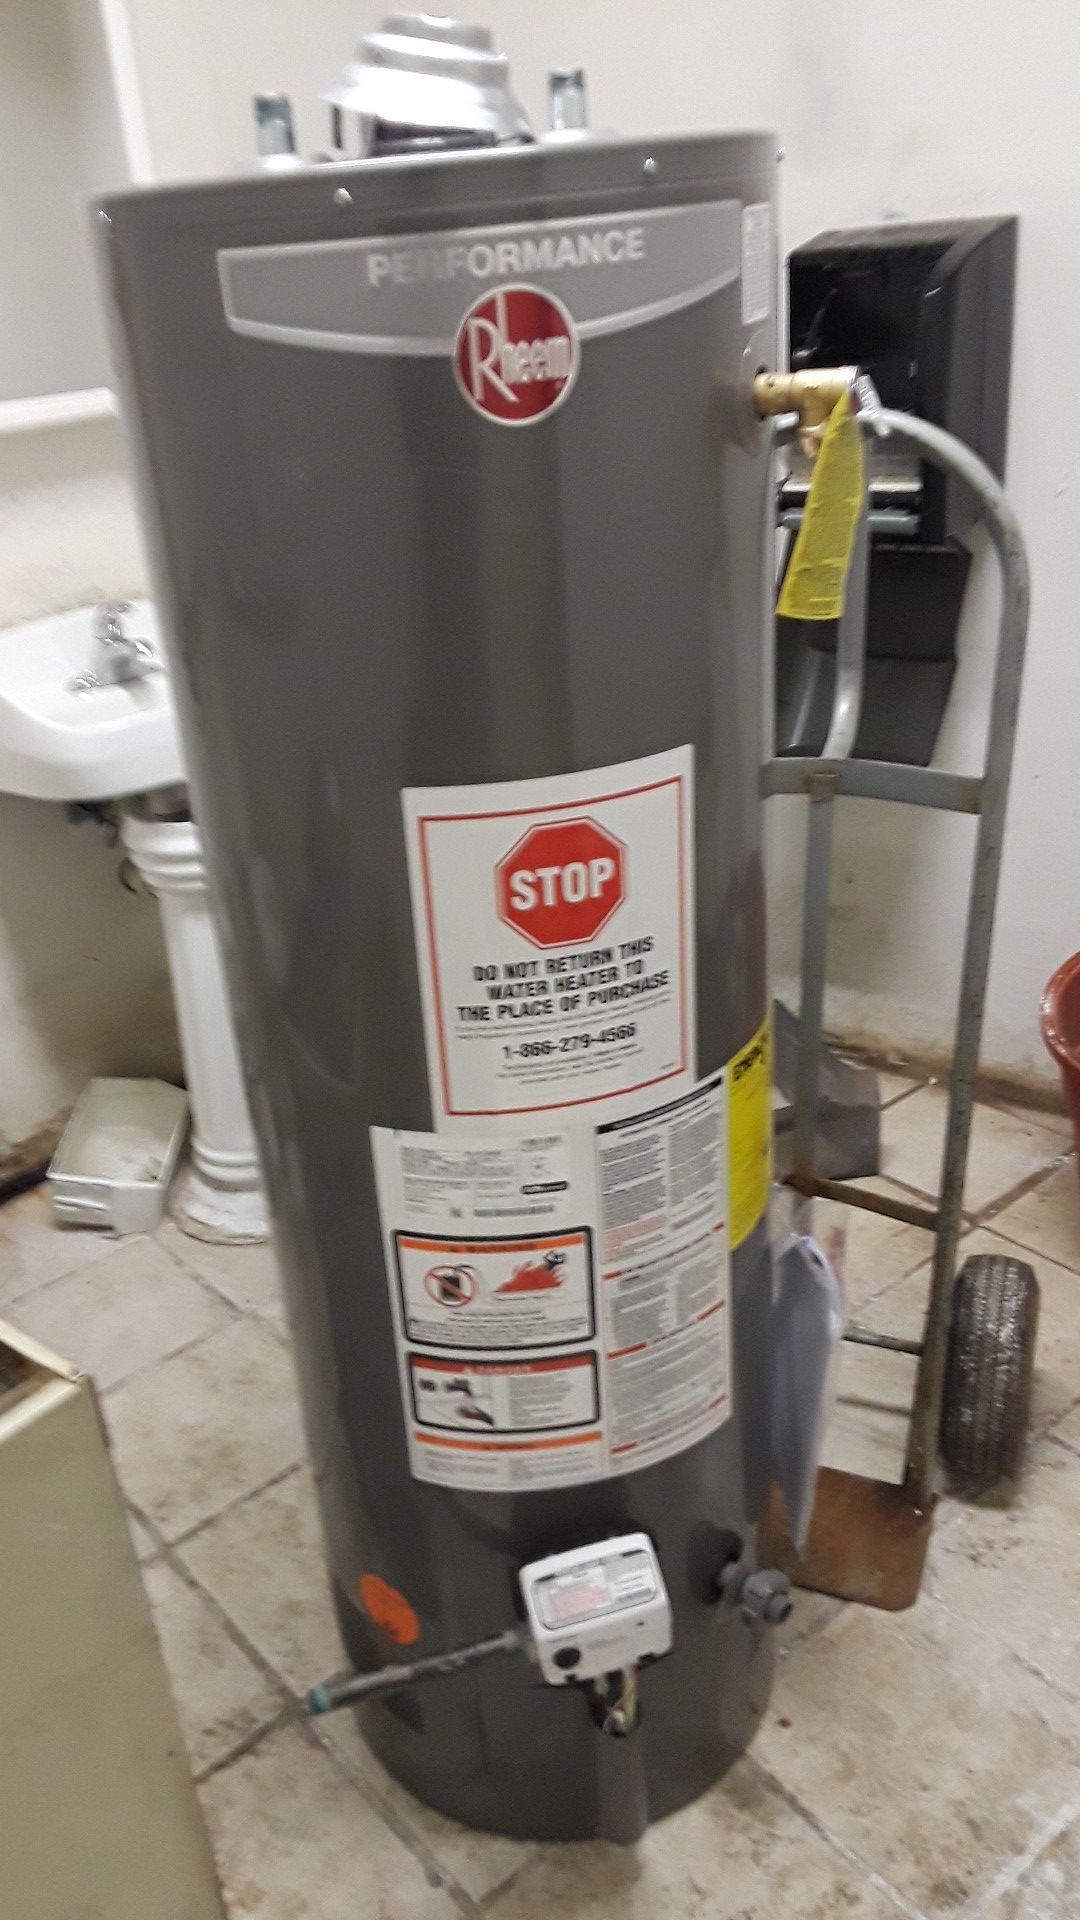 Brand new 40 gal hot water heater with manufacturer warranty